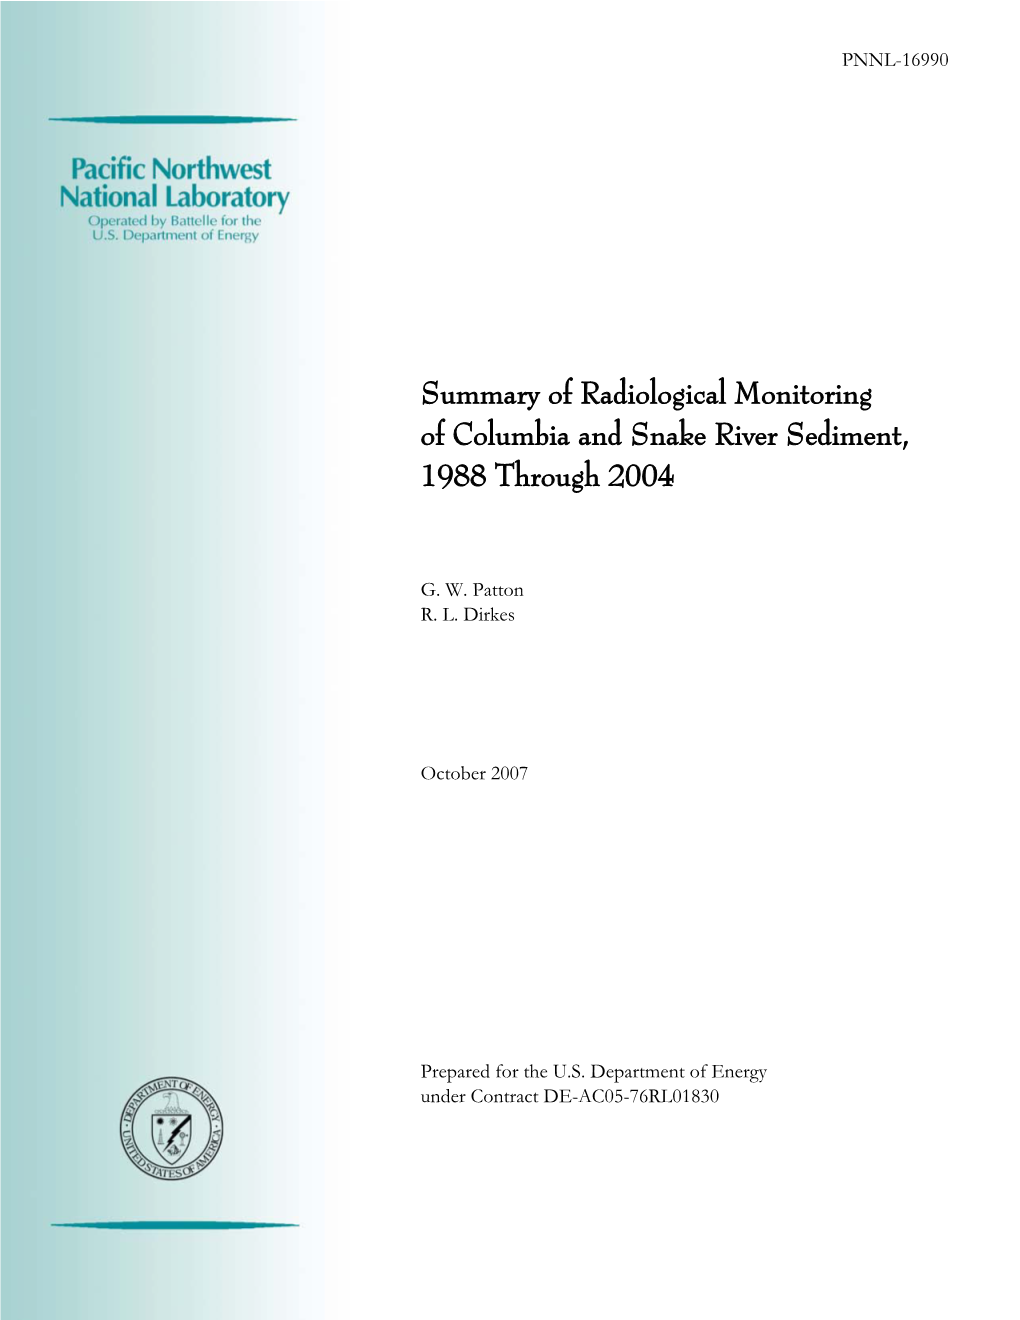 Summary of Radiological Monitoring of Columbia and Snake River Sediment, 1988 Through 2004